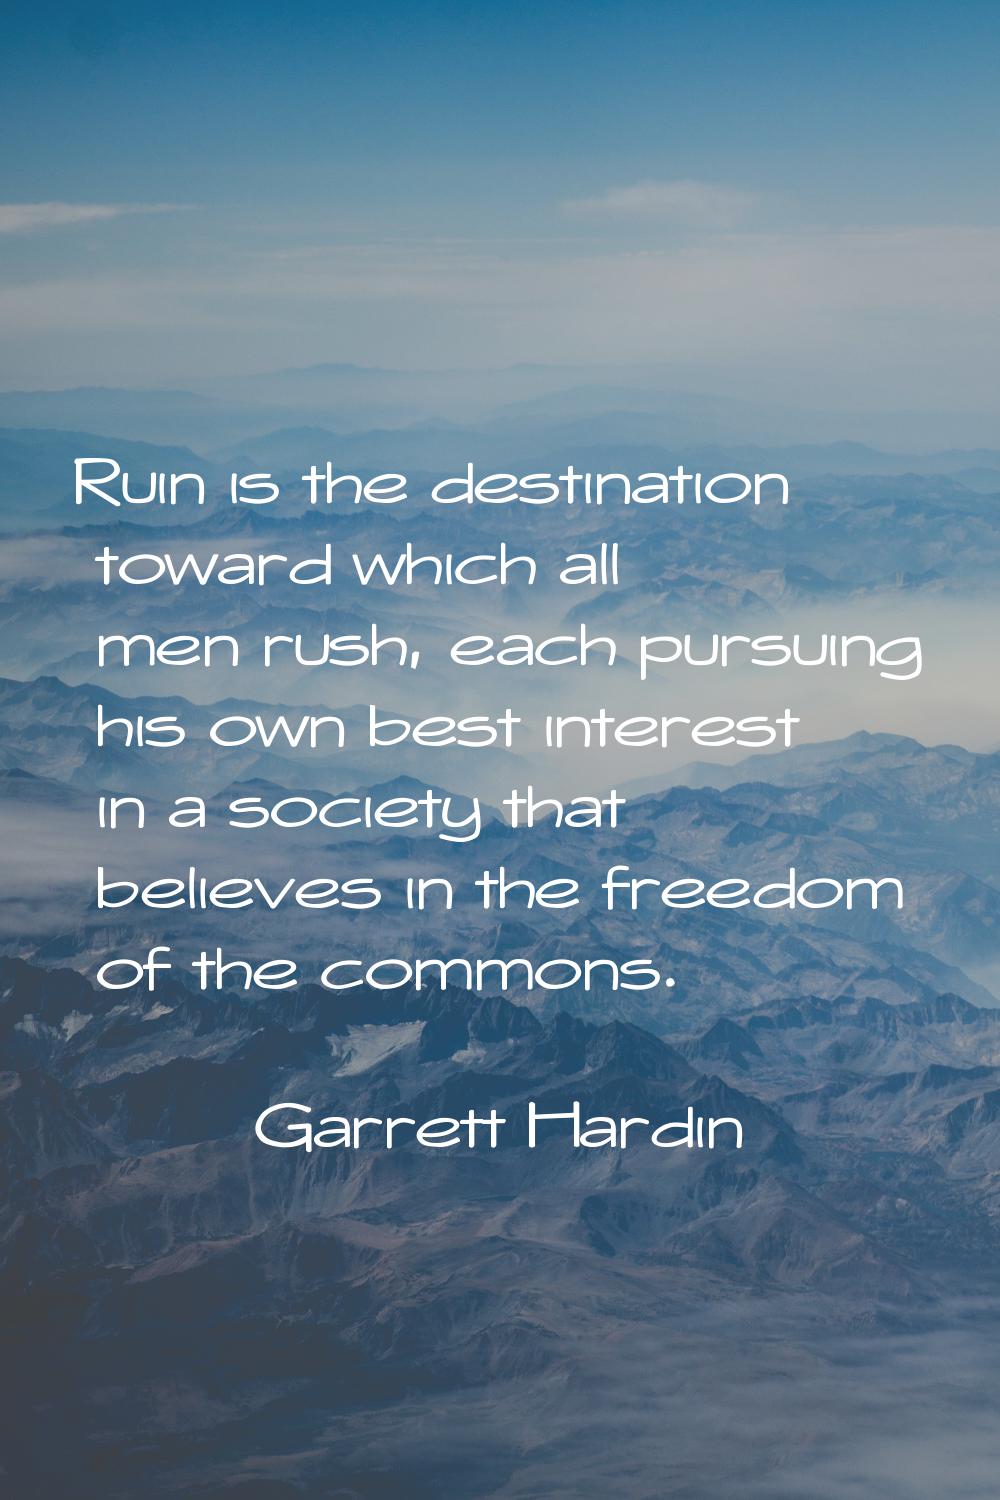 Ruin is the destination toward which all men rush, each pursuing his own best interest in a society